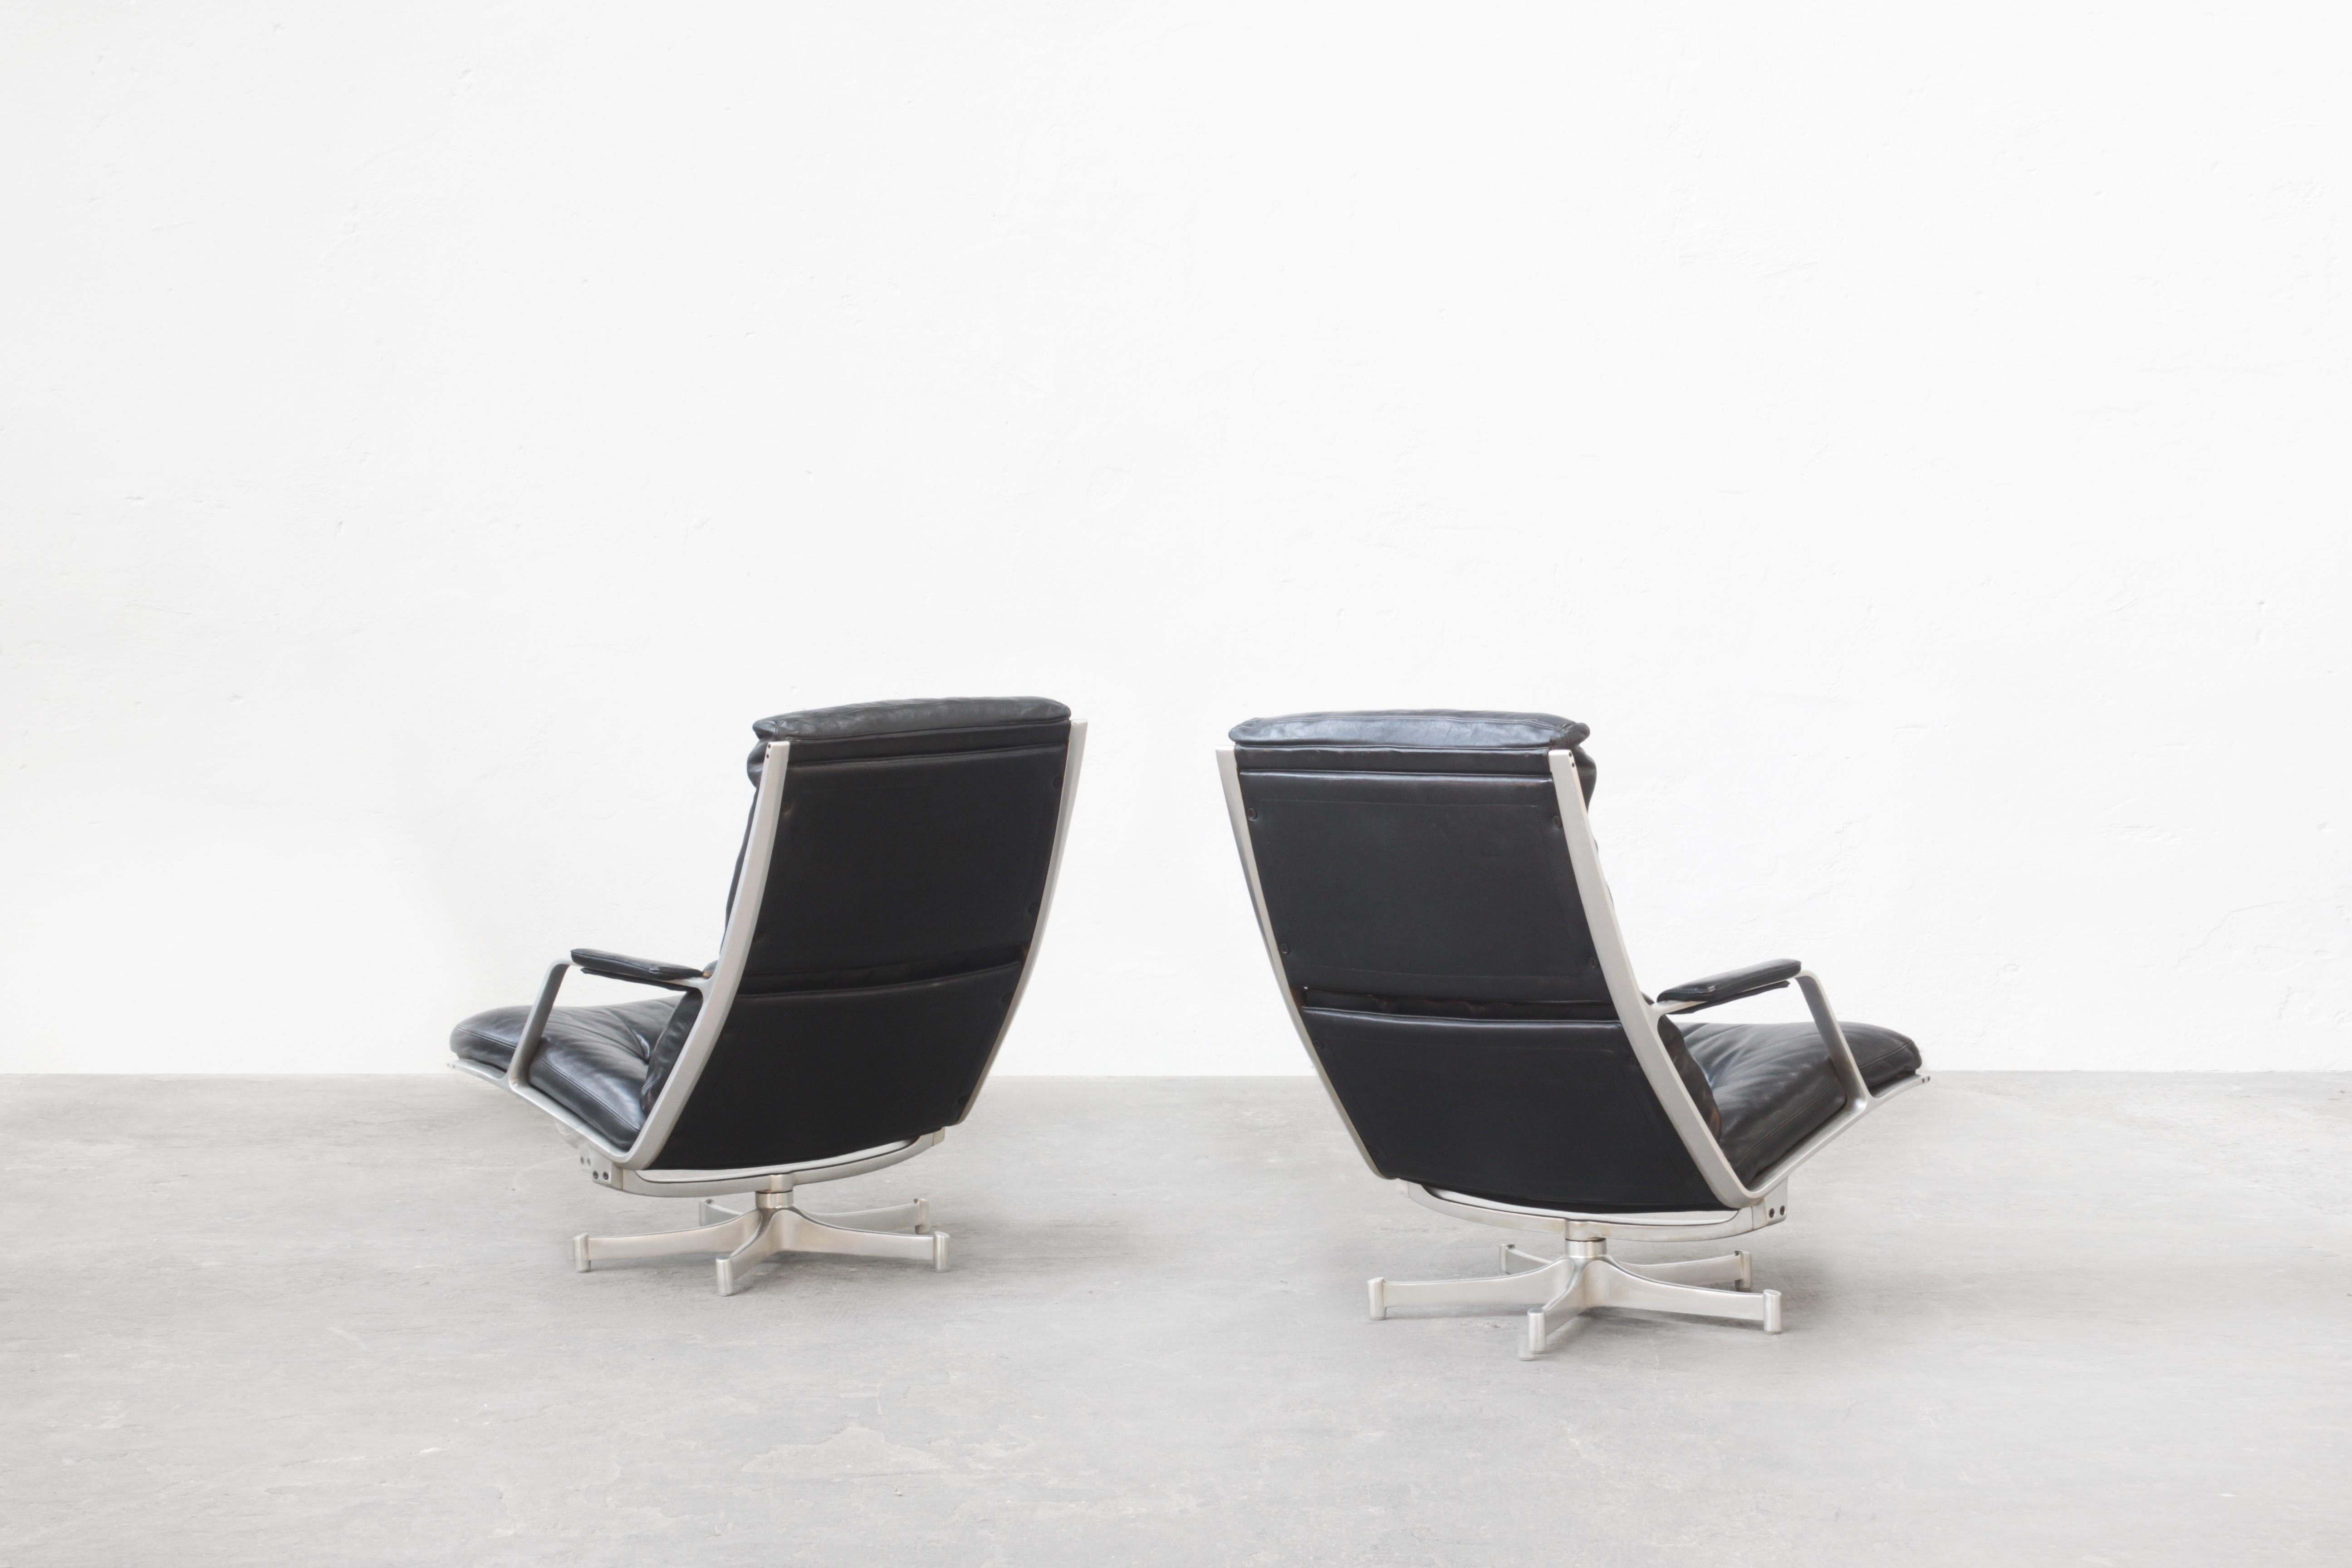 A pair of beautiful lounge chairs by Preben Fabricius and Jørgen Kastholm for Kill International, designed in 1968, was made in Germany. The lounge chairs are upholstered in thick black leather and are both in very good condition with just little